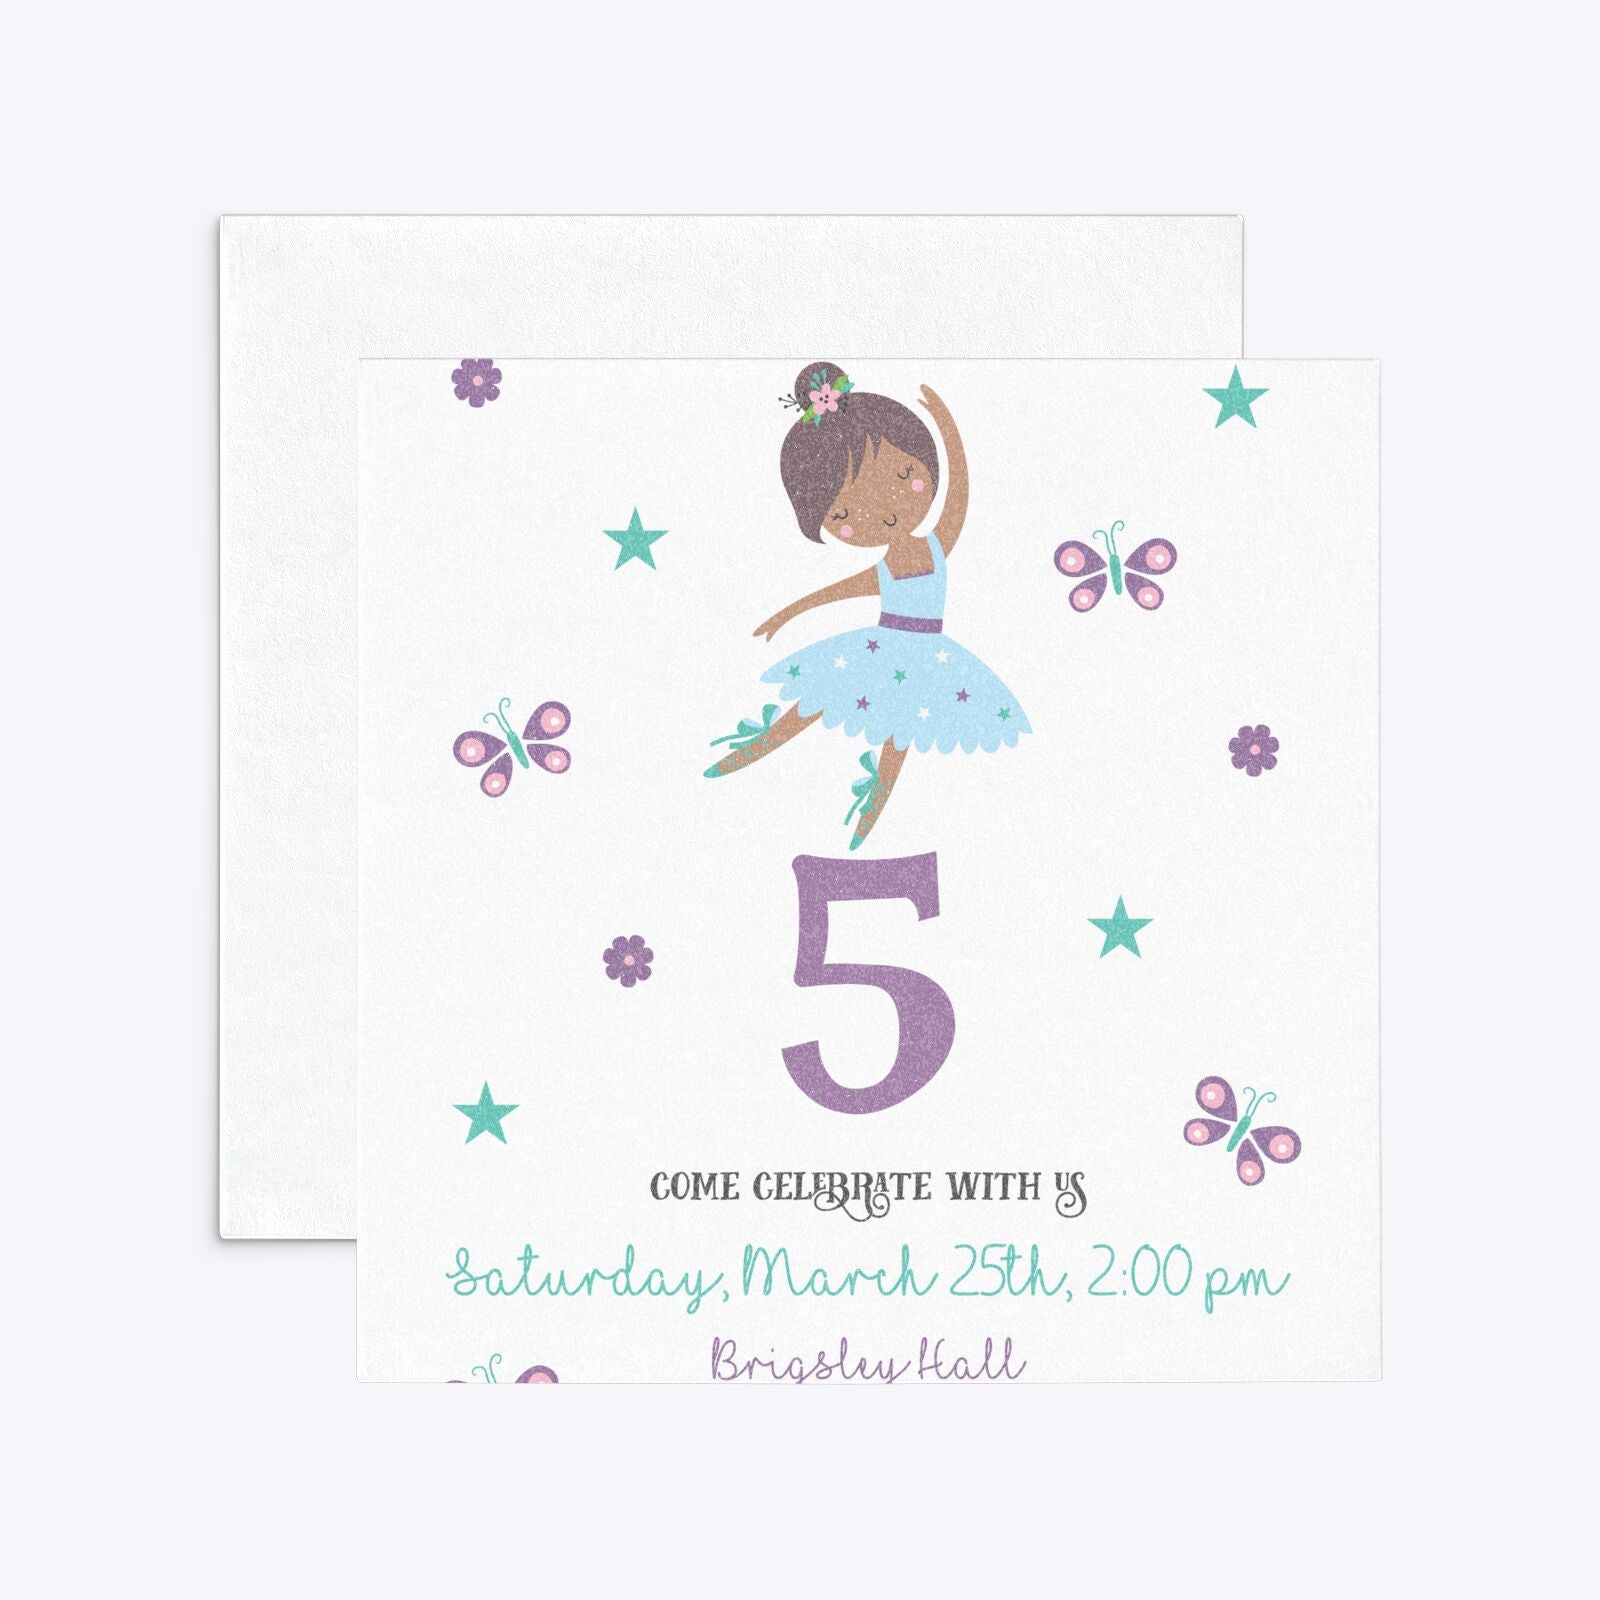 Ballerina Birthday Personalised Square 5 25x5 25 Invitation Glitter Front and Back Image